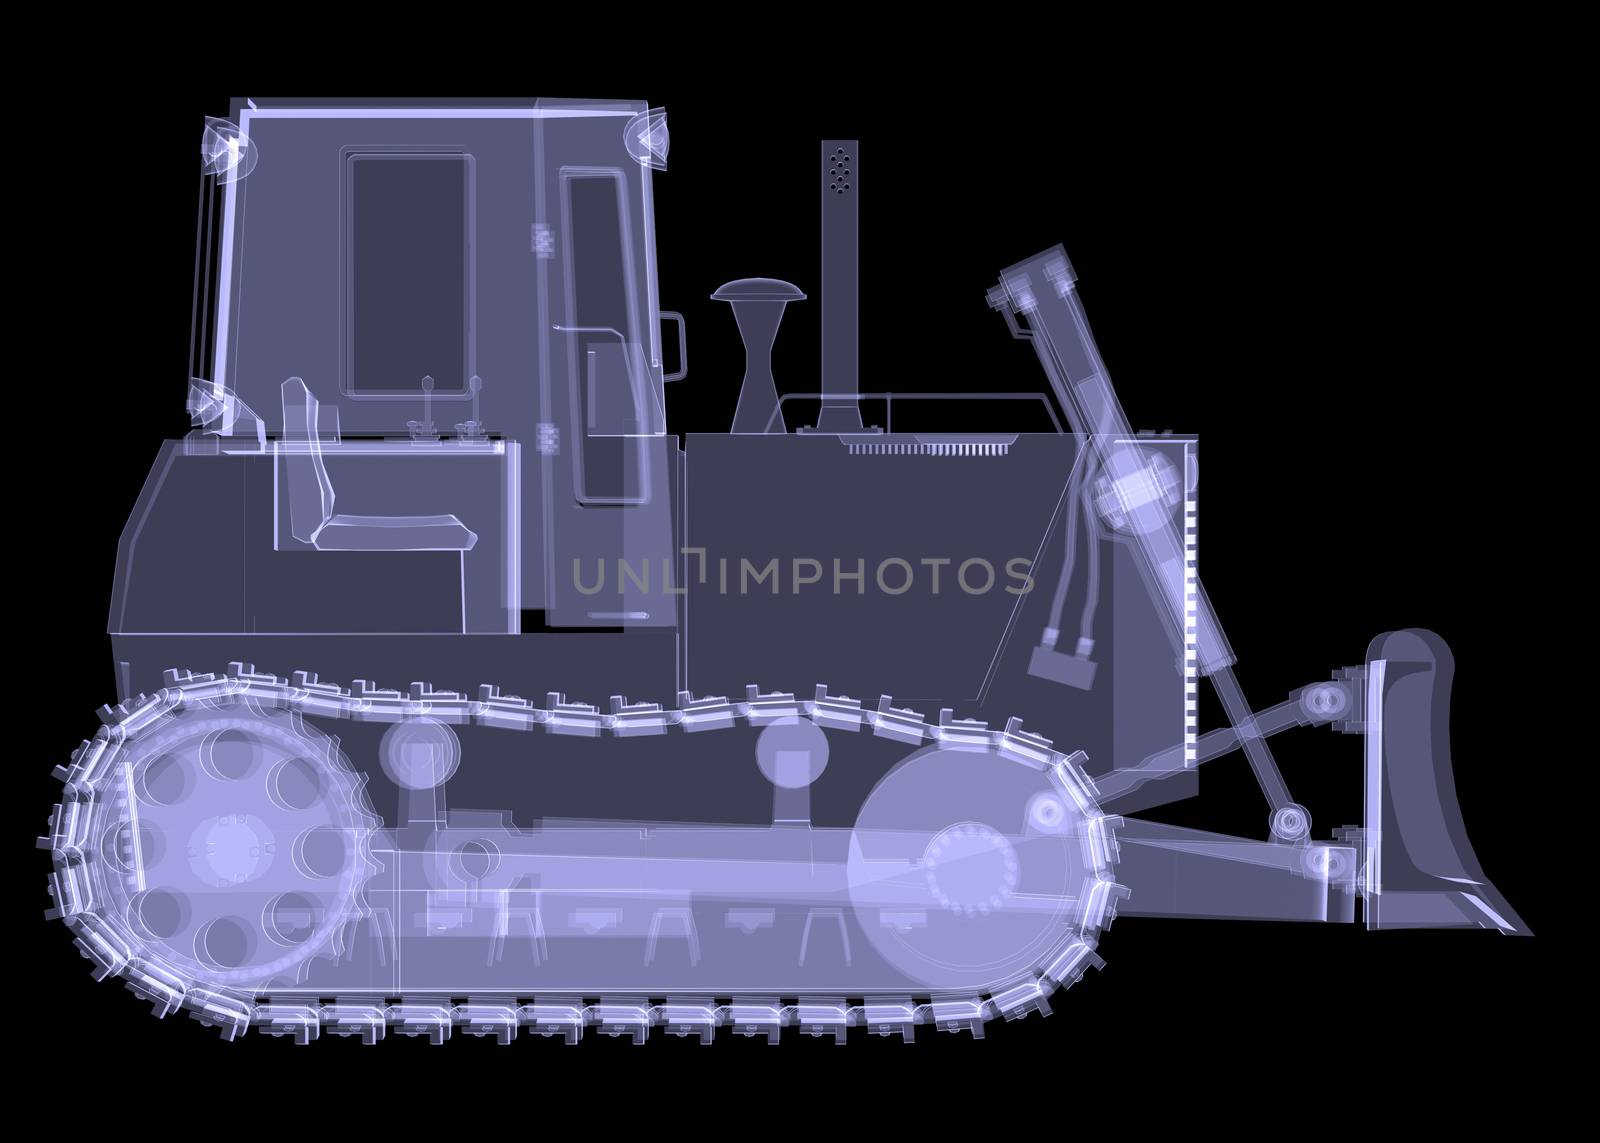 Bulldozer. X-ray. 3d render isolated on a black background